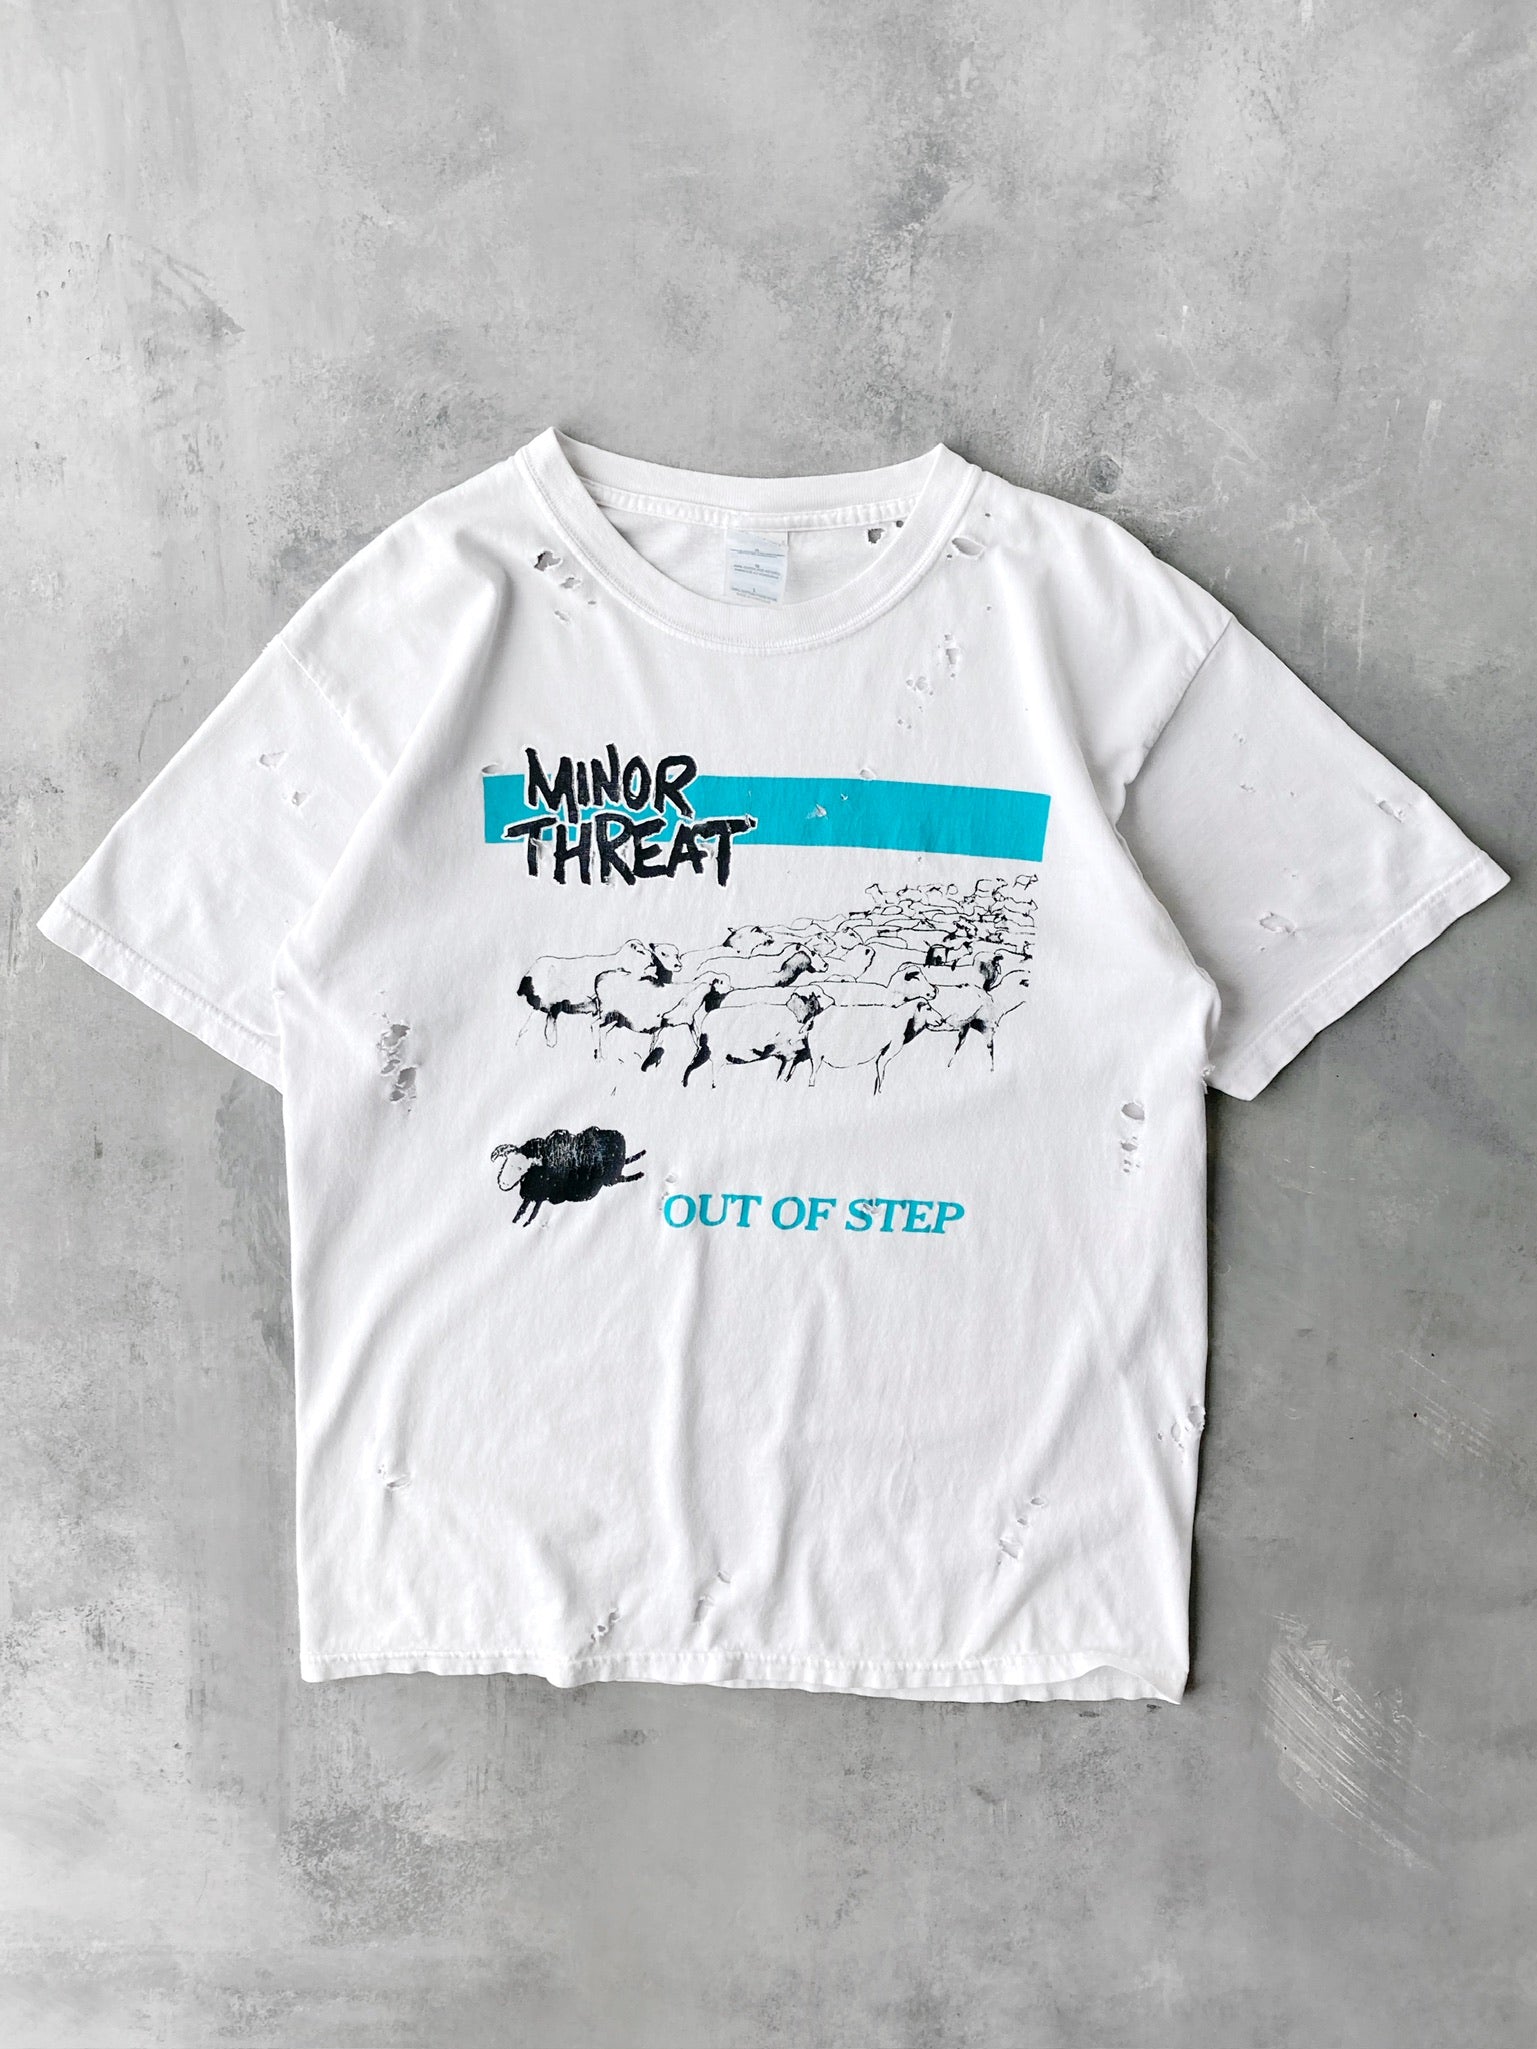 00's MINOR THREAT out of step Tシャツ Lマイナースレット